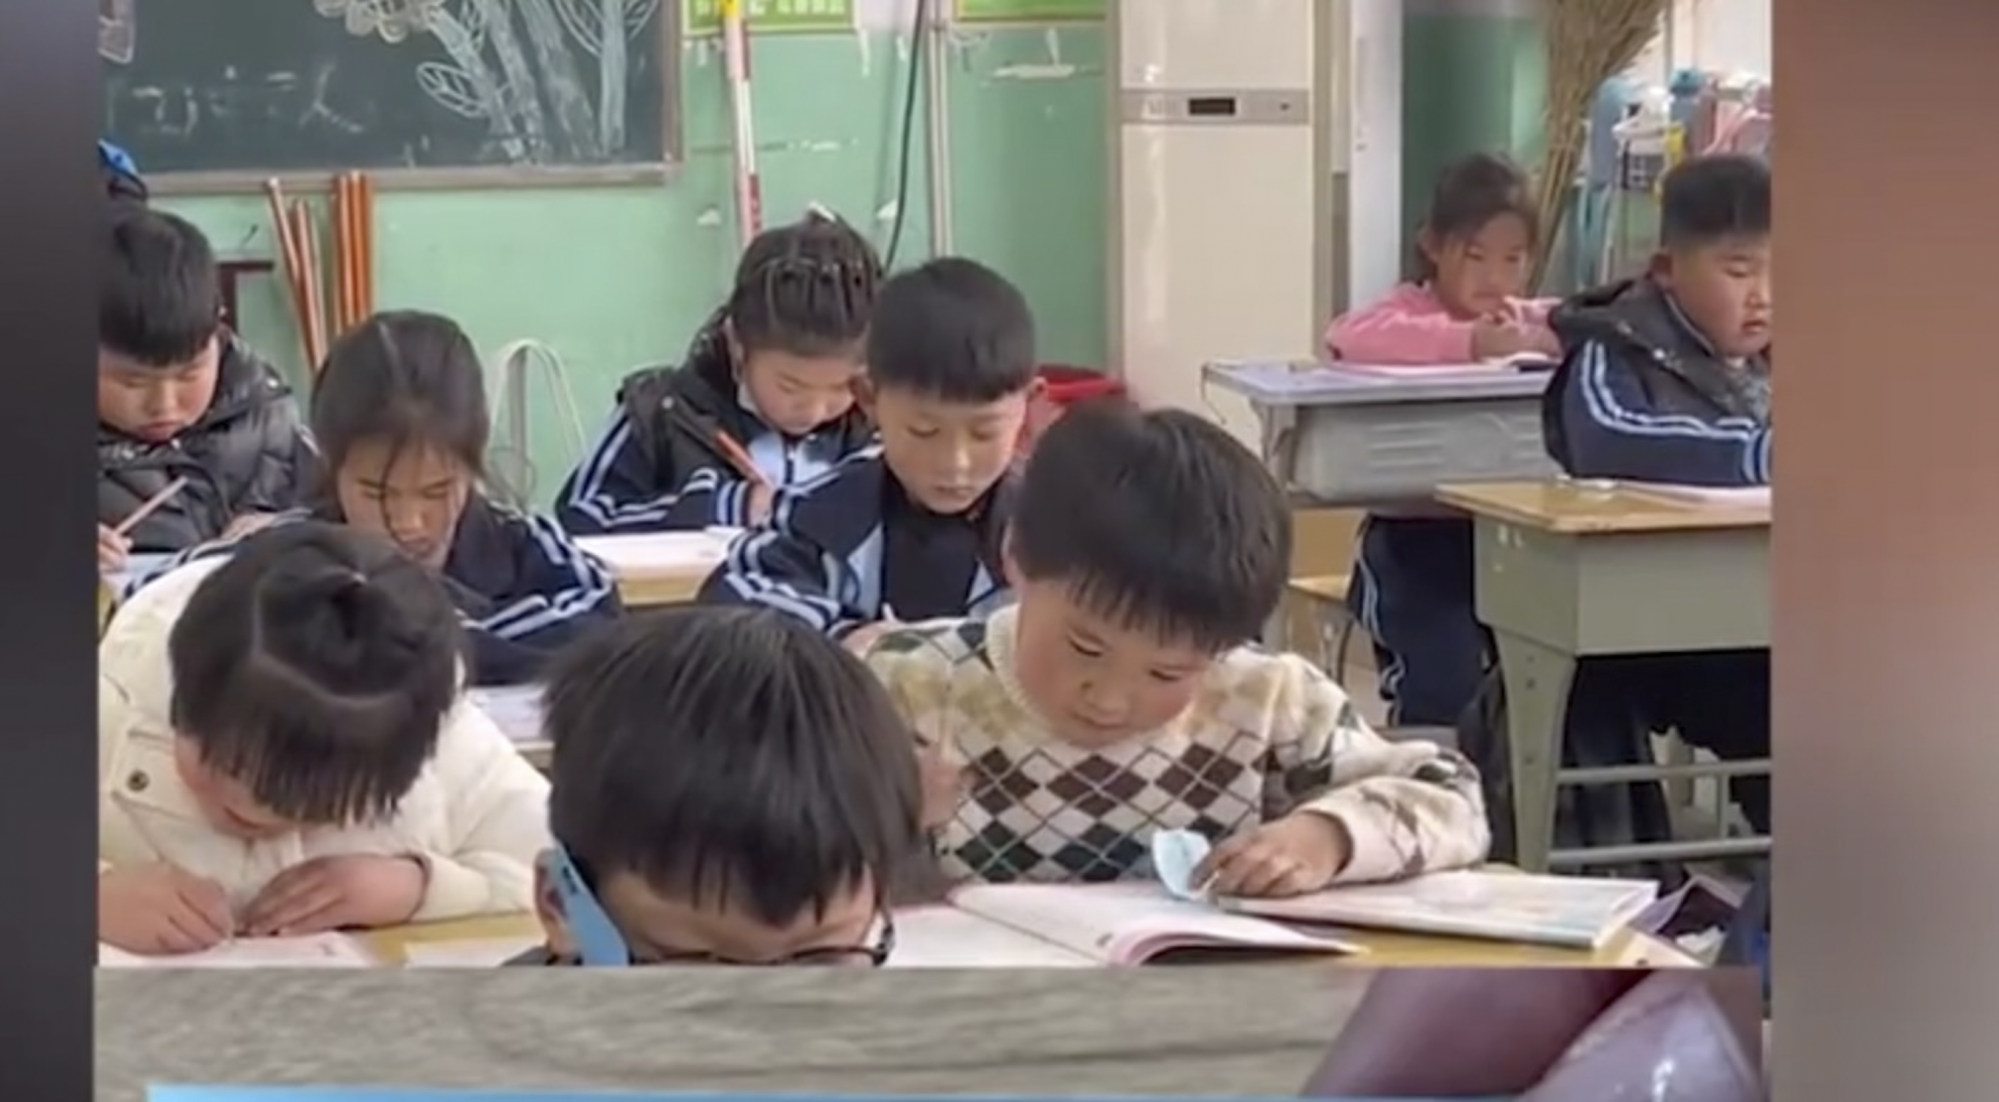 A viral video shows the students’ reactions after reading the personalised notes from their teacher in class. Photo: Baidu